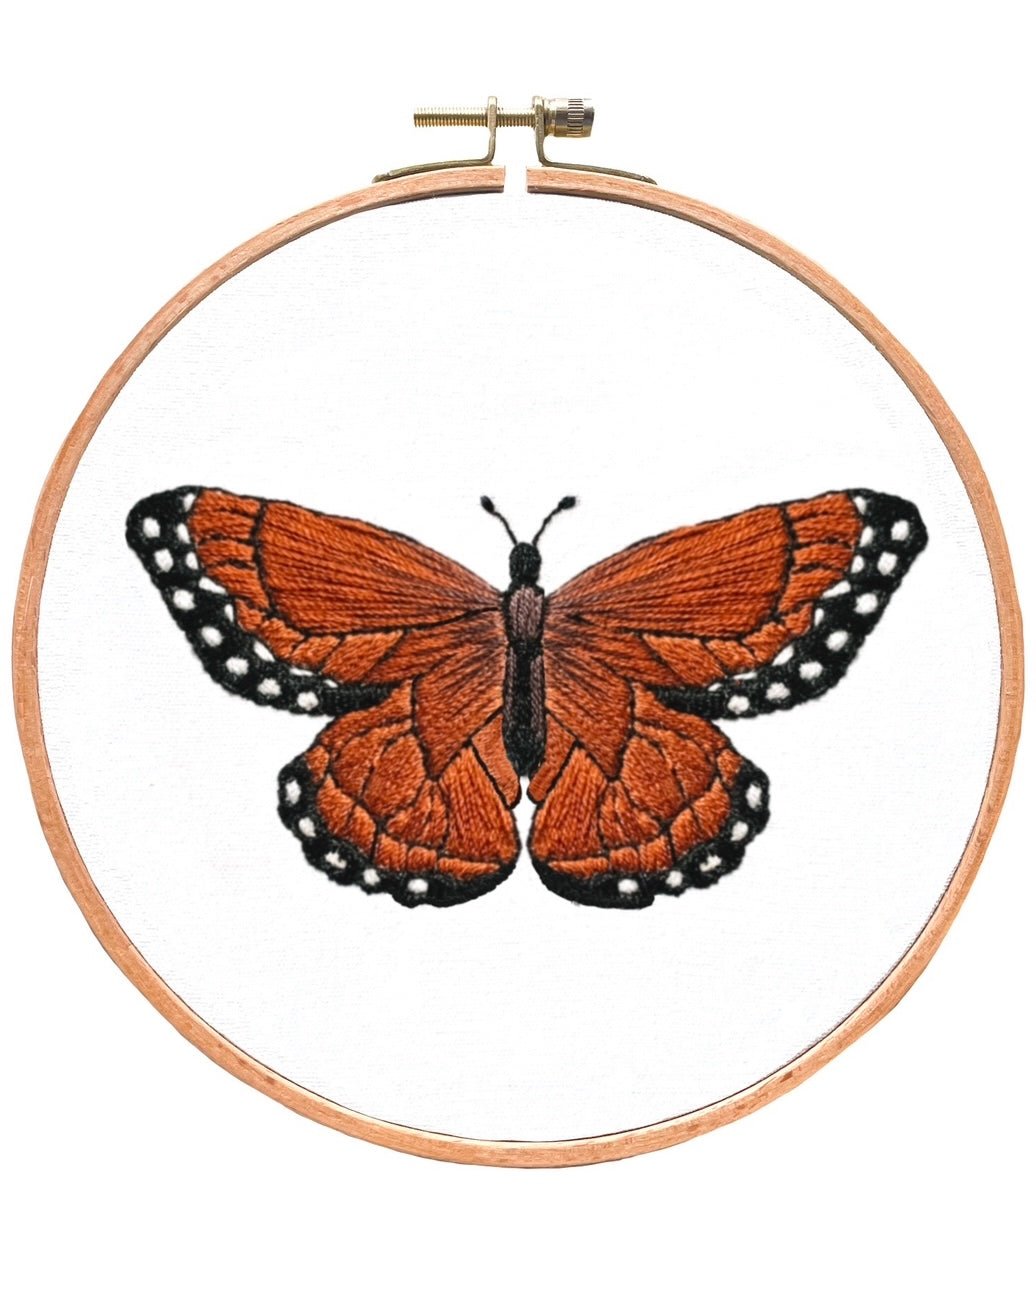 Brown Butterfly Embroidery Kit - Stitched Up Kits